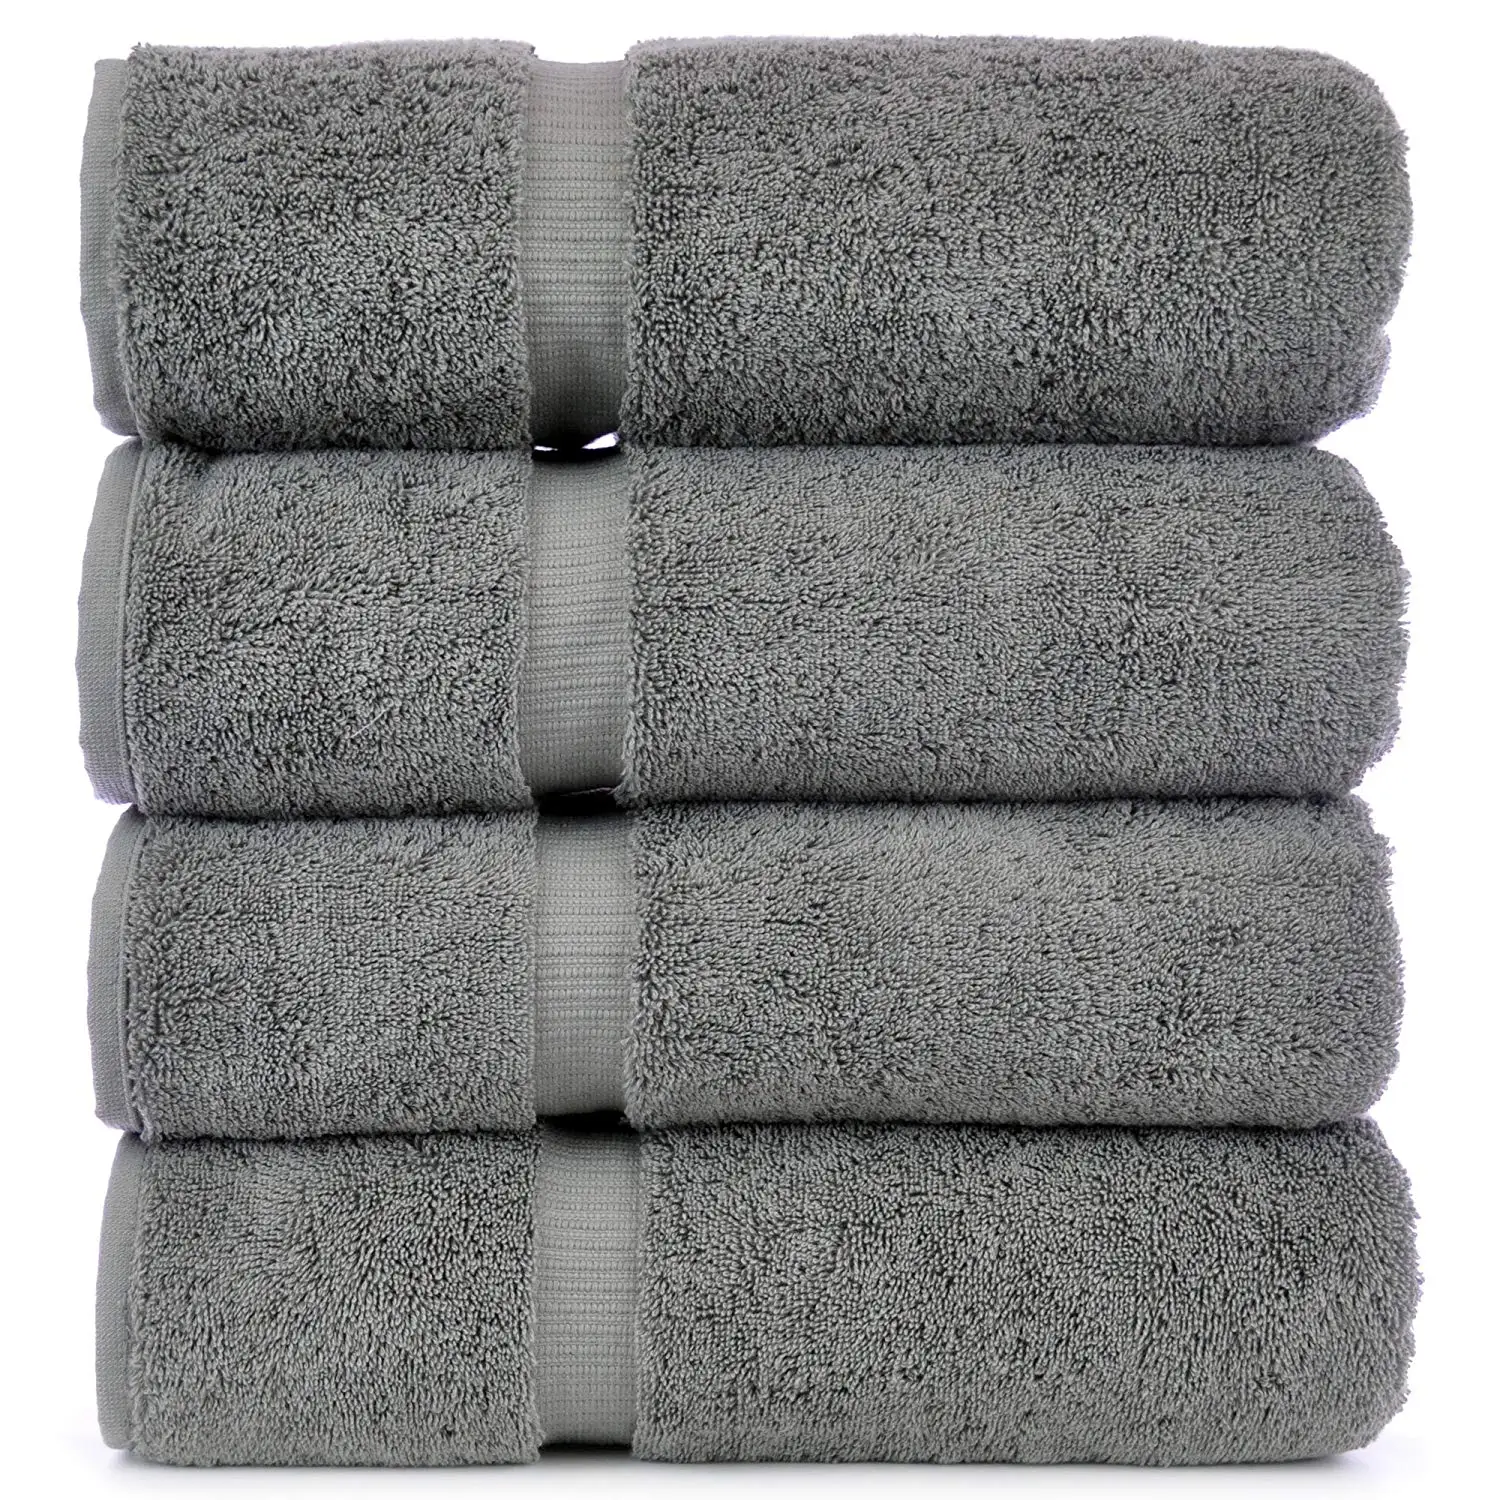 Egyptian Cotton and Turkish Luxury Hotel Towels